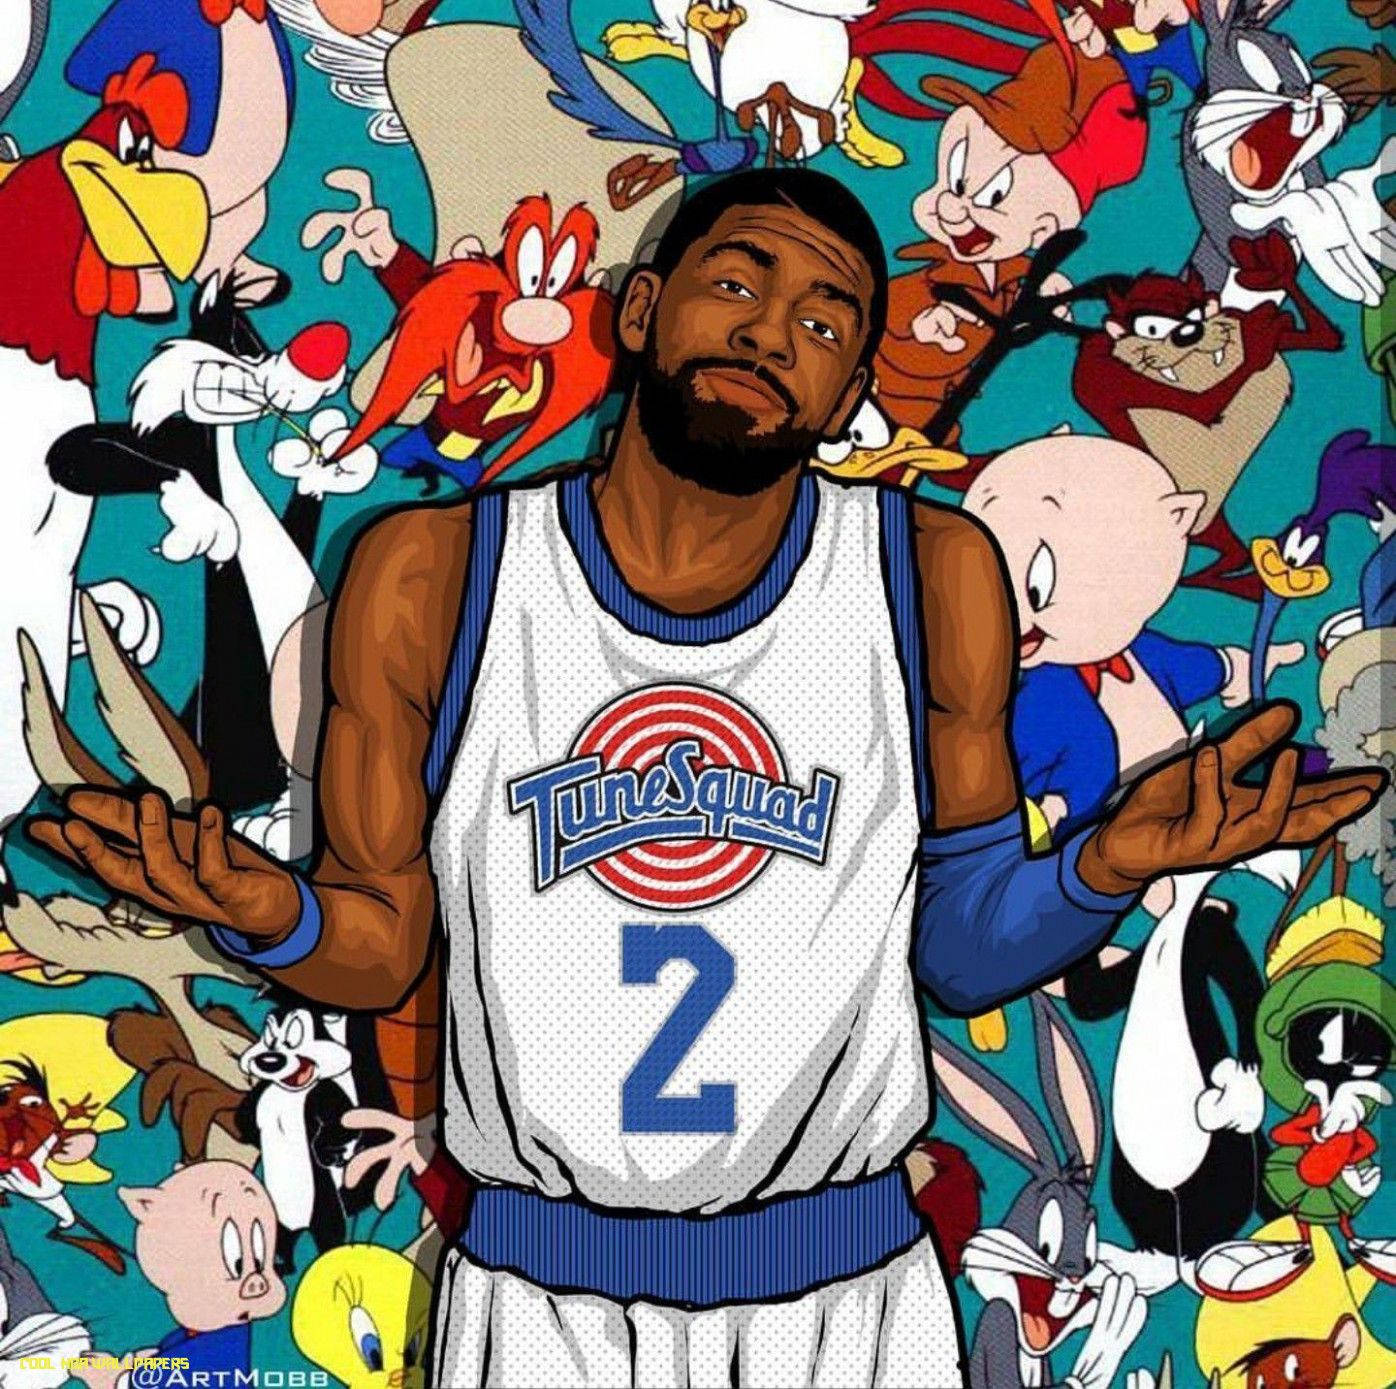 Cool Nba Kyrie Irving Tune Squad Wallpaper